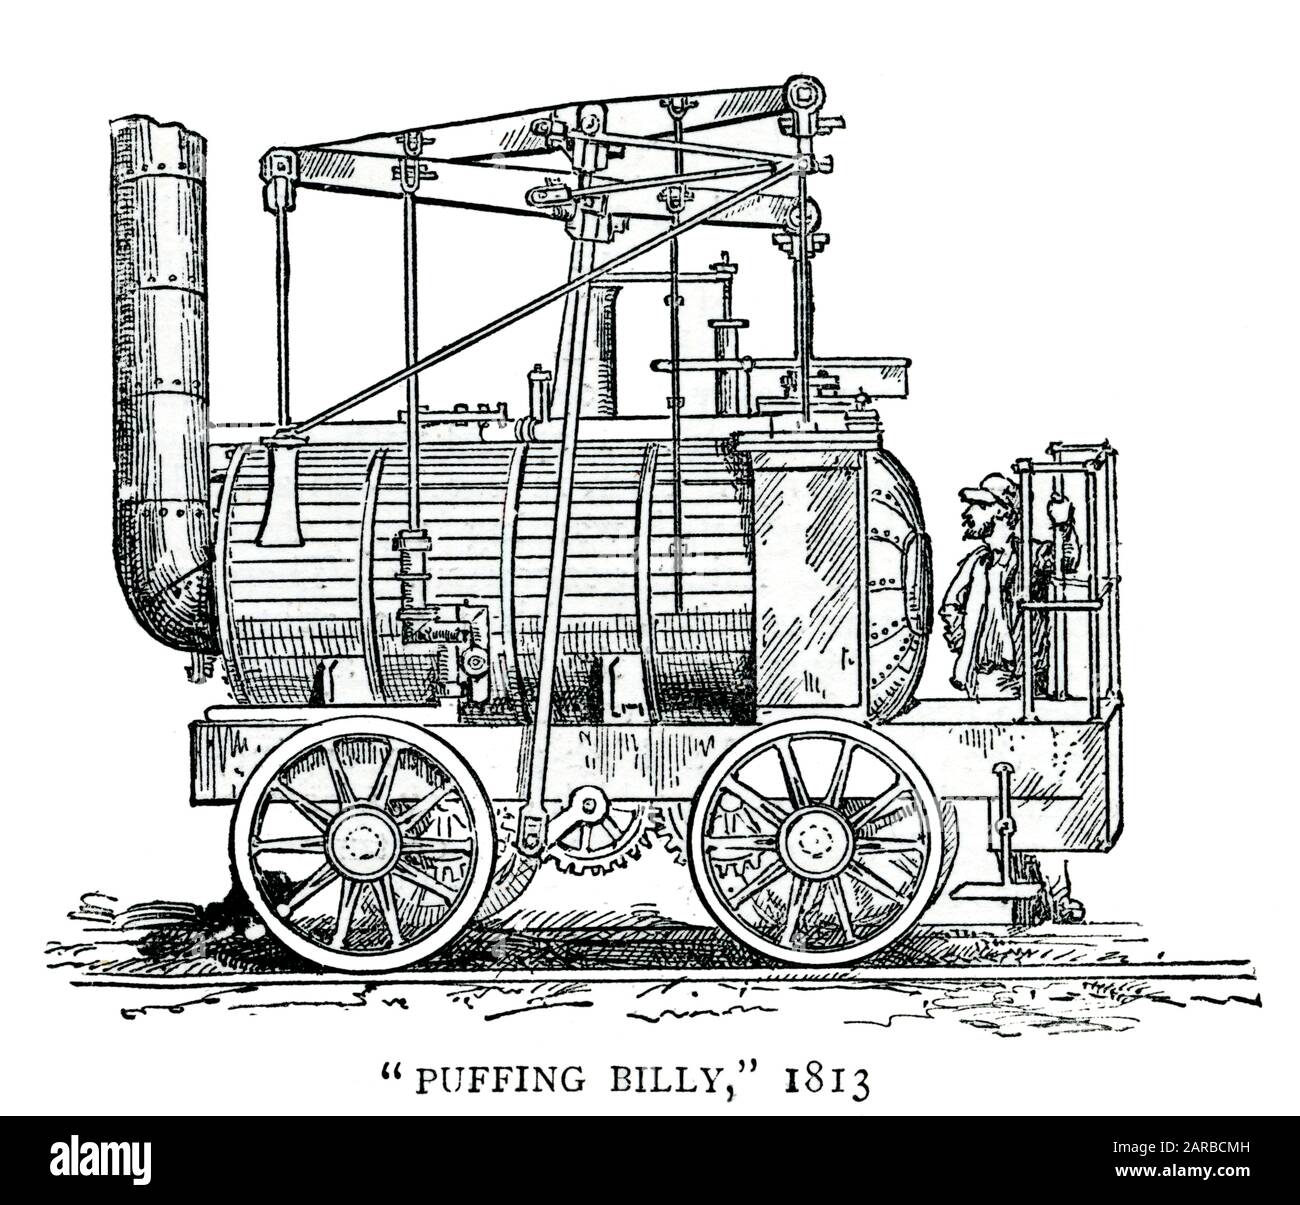 Puffing Billy, steam locomotive, constructed by William Hedley, engine wright Jonathan Forster and blacksmith Timothy Hackworth for Christopher Blackett, the owner of Wylam Colliery near Newcastle upon Tyne     Date: 1813 Stock Photo